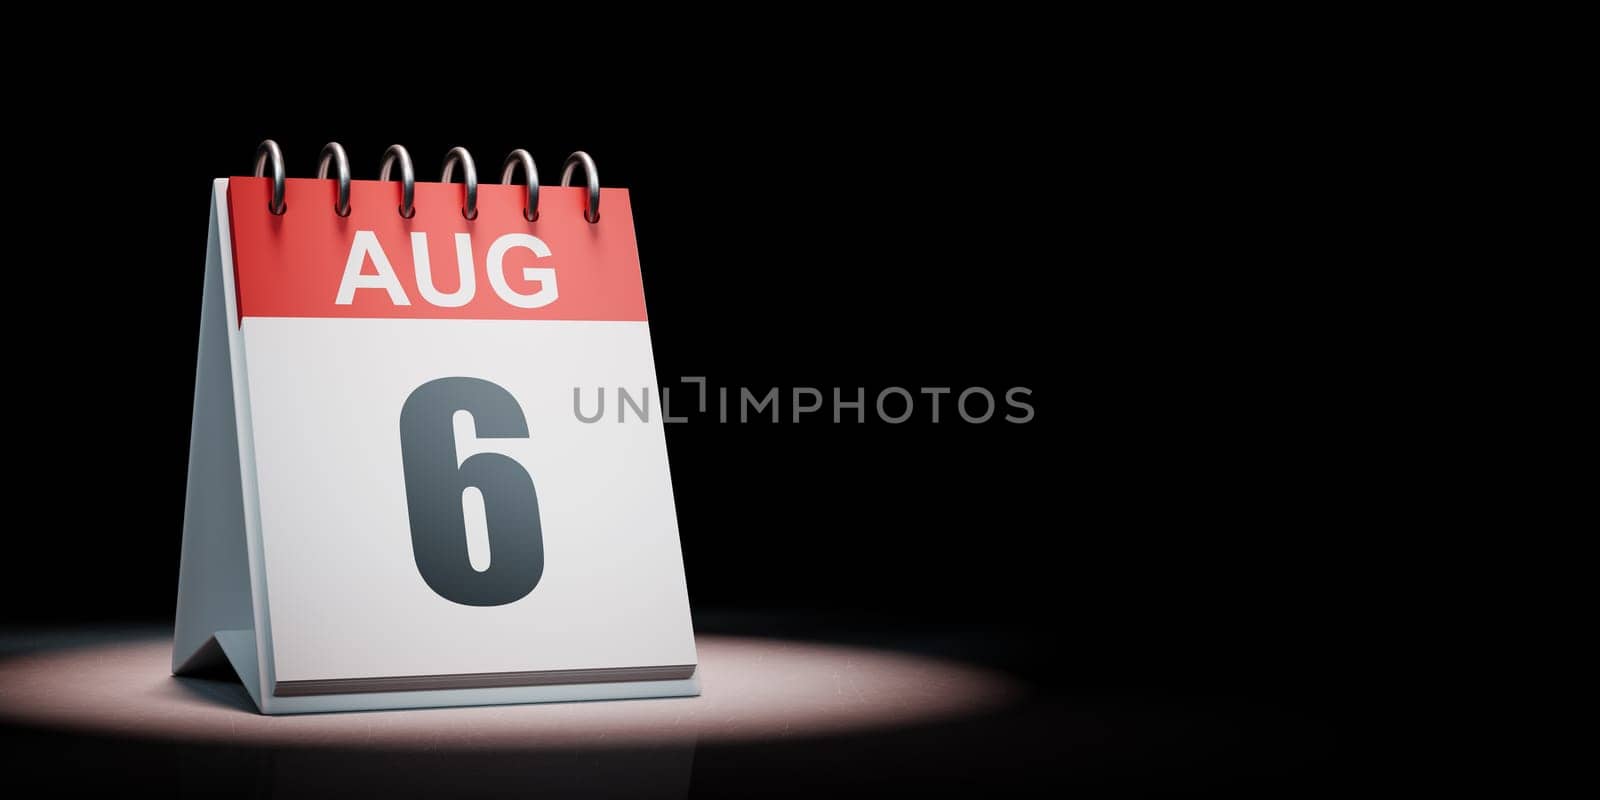 Red and White August 6 Desk Calendar Spotlighted on Black Background with Copy Space 3D Illustration